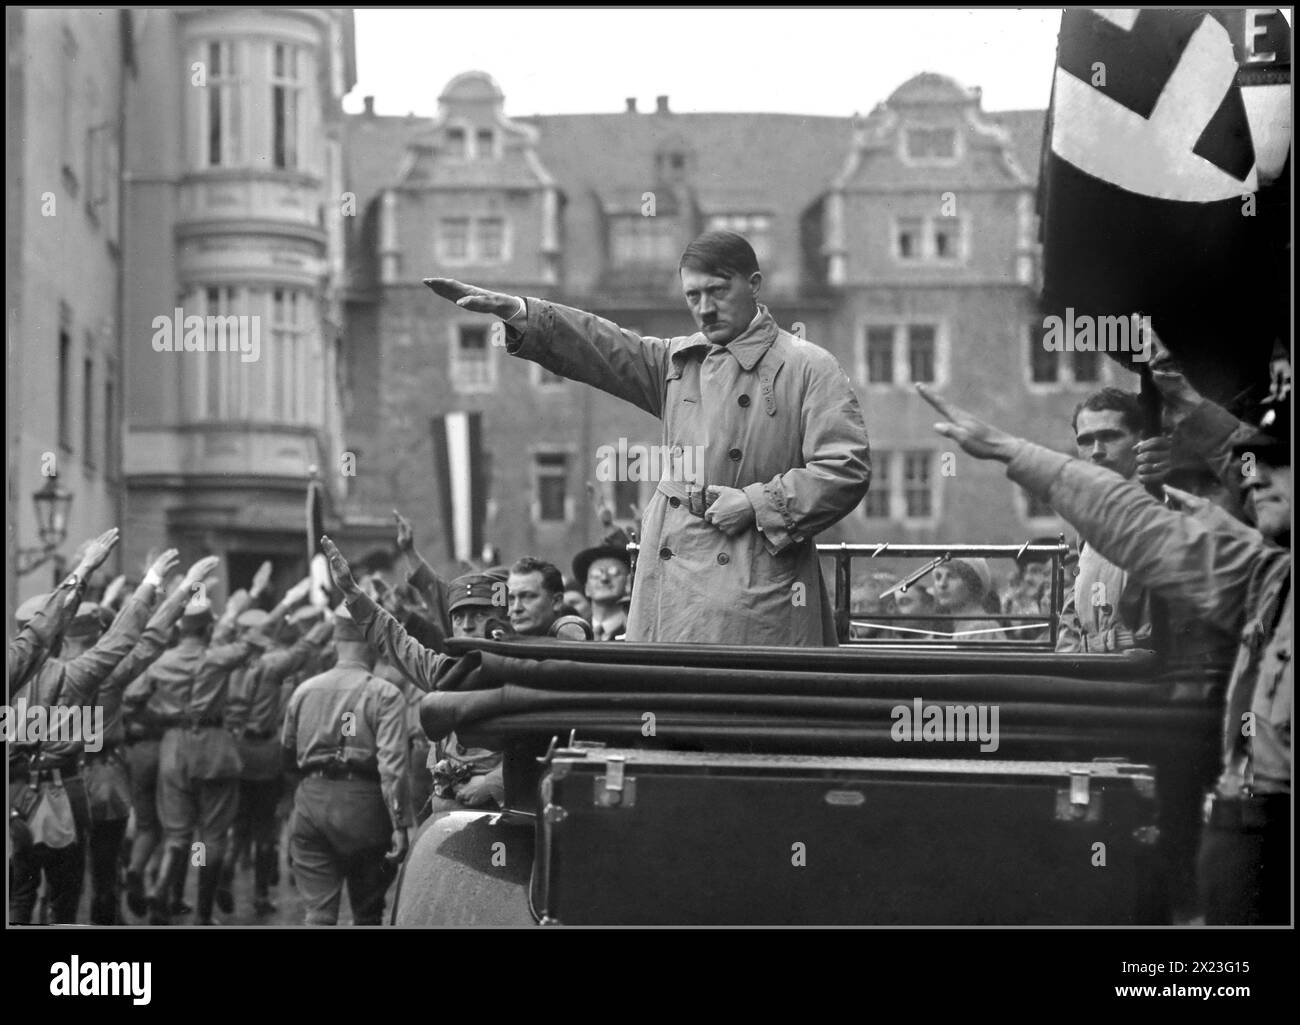 1930s Adolf Hitler in civilian clothing standing in the back of his open top Mercedes car, with a stern expression, giving a Heil Hitler salute to the passing Sturmbleitung paramilitary army marching past. Rudolf Hess featured under the Swastika flag. Hermann Goering also present standing in front of the Mercedes car. Standing next to Goering is Julius Streicher a notorious anti semite who started the Der Sturmer Newspaper to disseminate anti semitic  Nazi propaganda. Nurnberg Nuremberg Rally Nazi Gemany 1930s Stock Photo